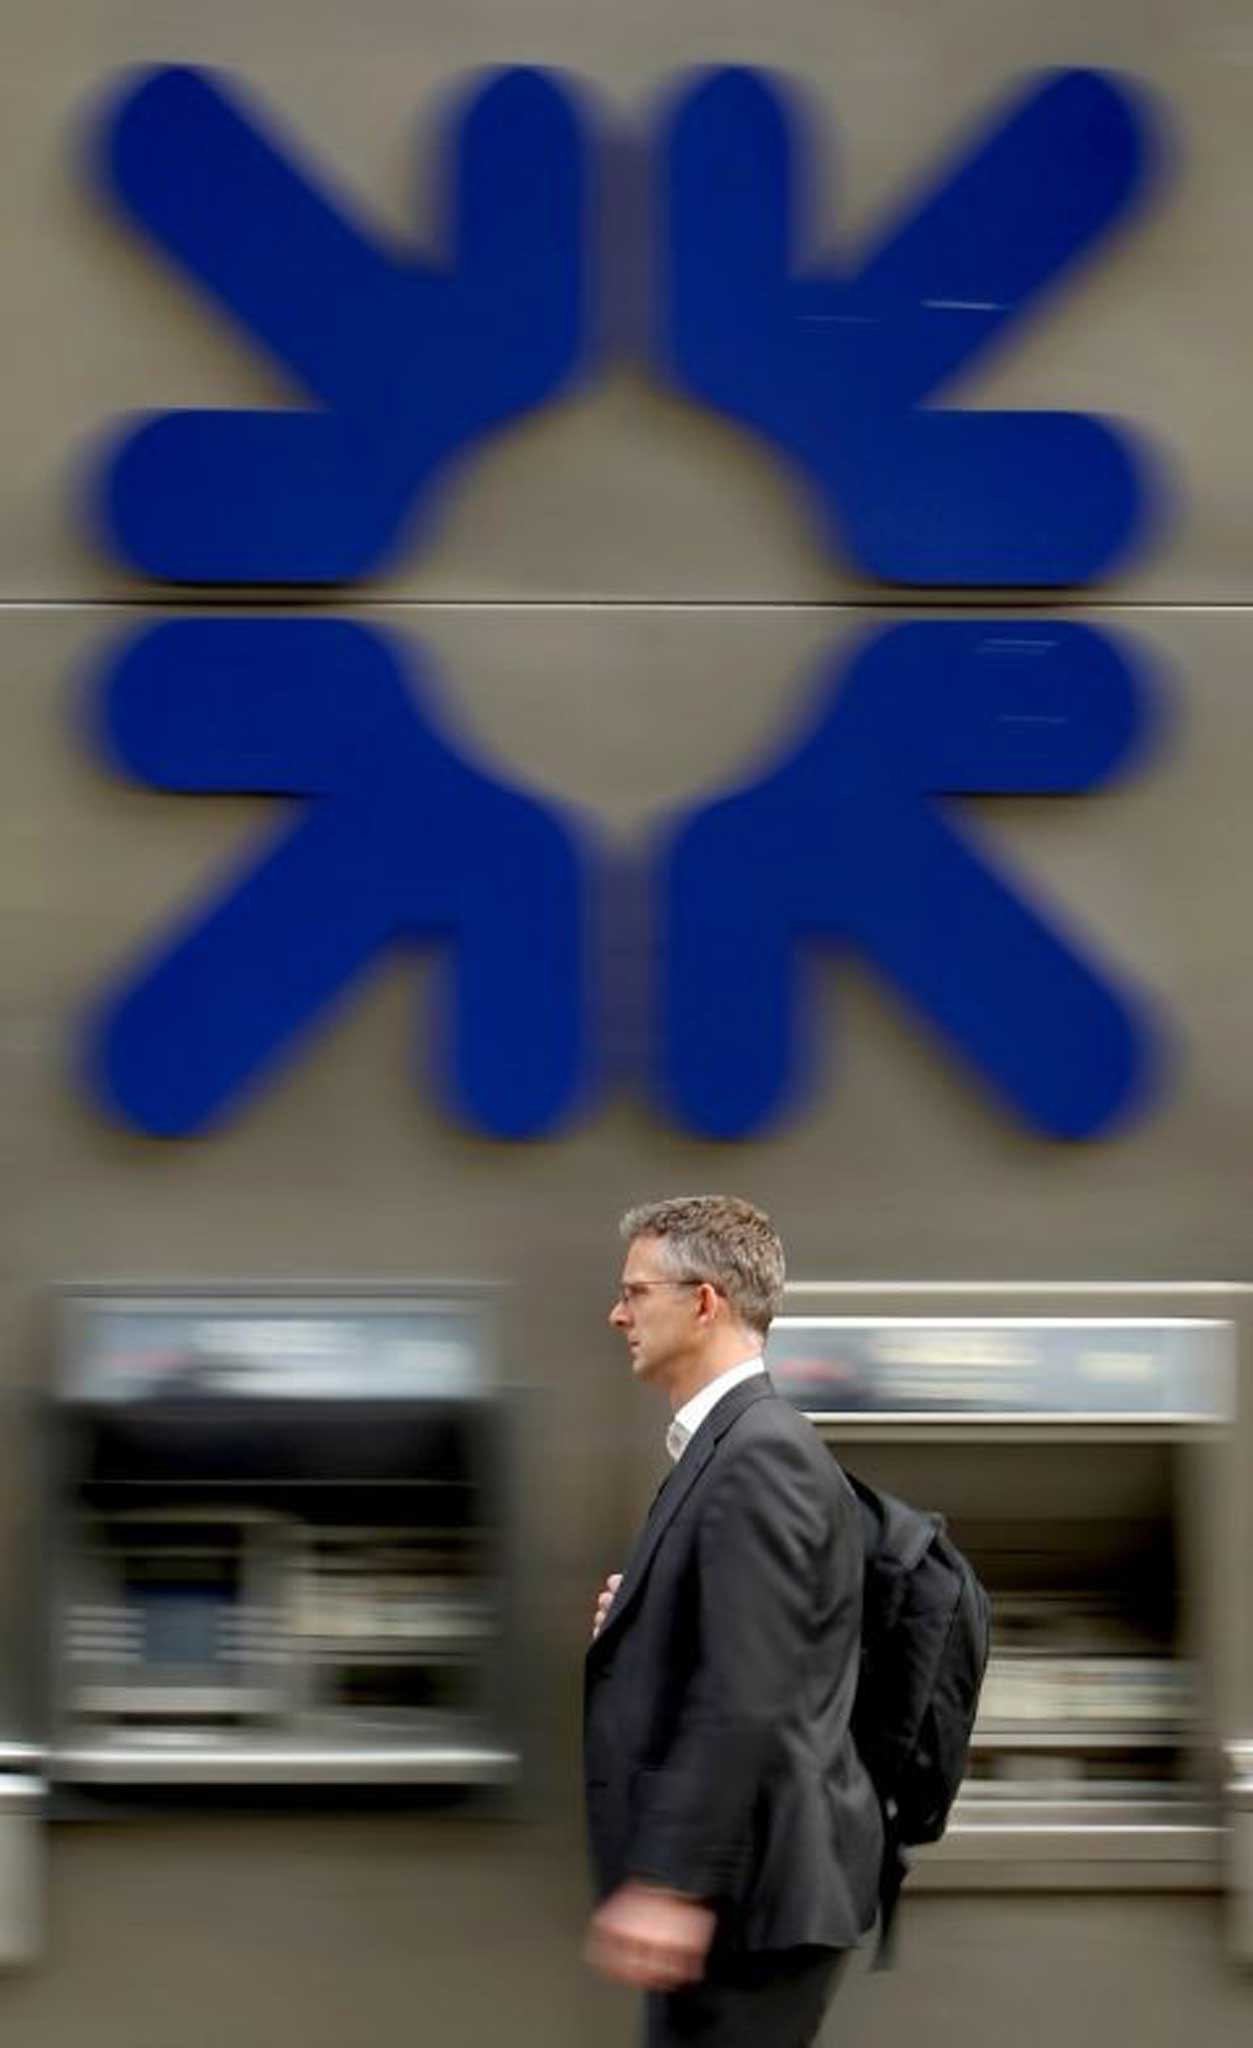 RBS's chief executive wants to change the bank's reputation from the least-trusted to the best-trusted - while shutting dozens of branches